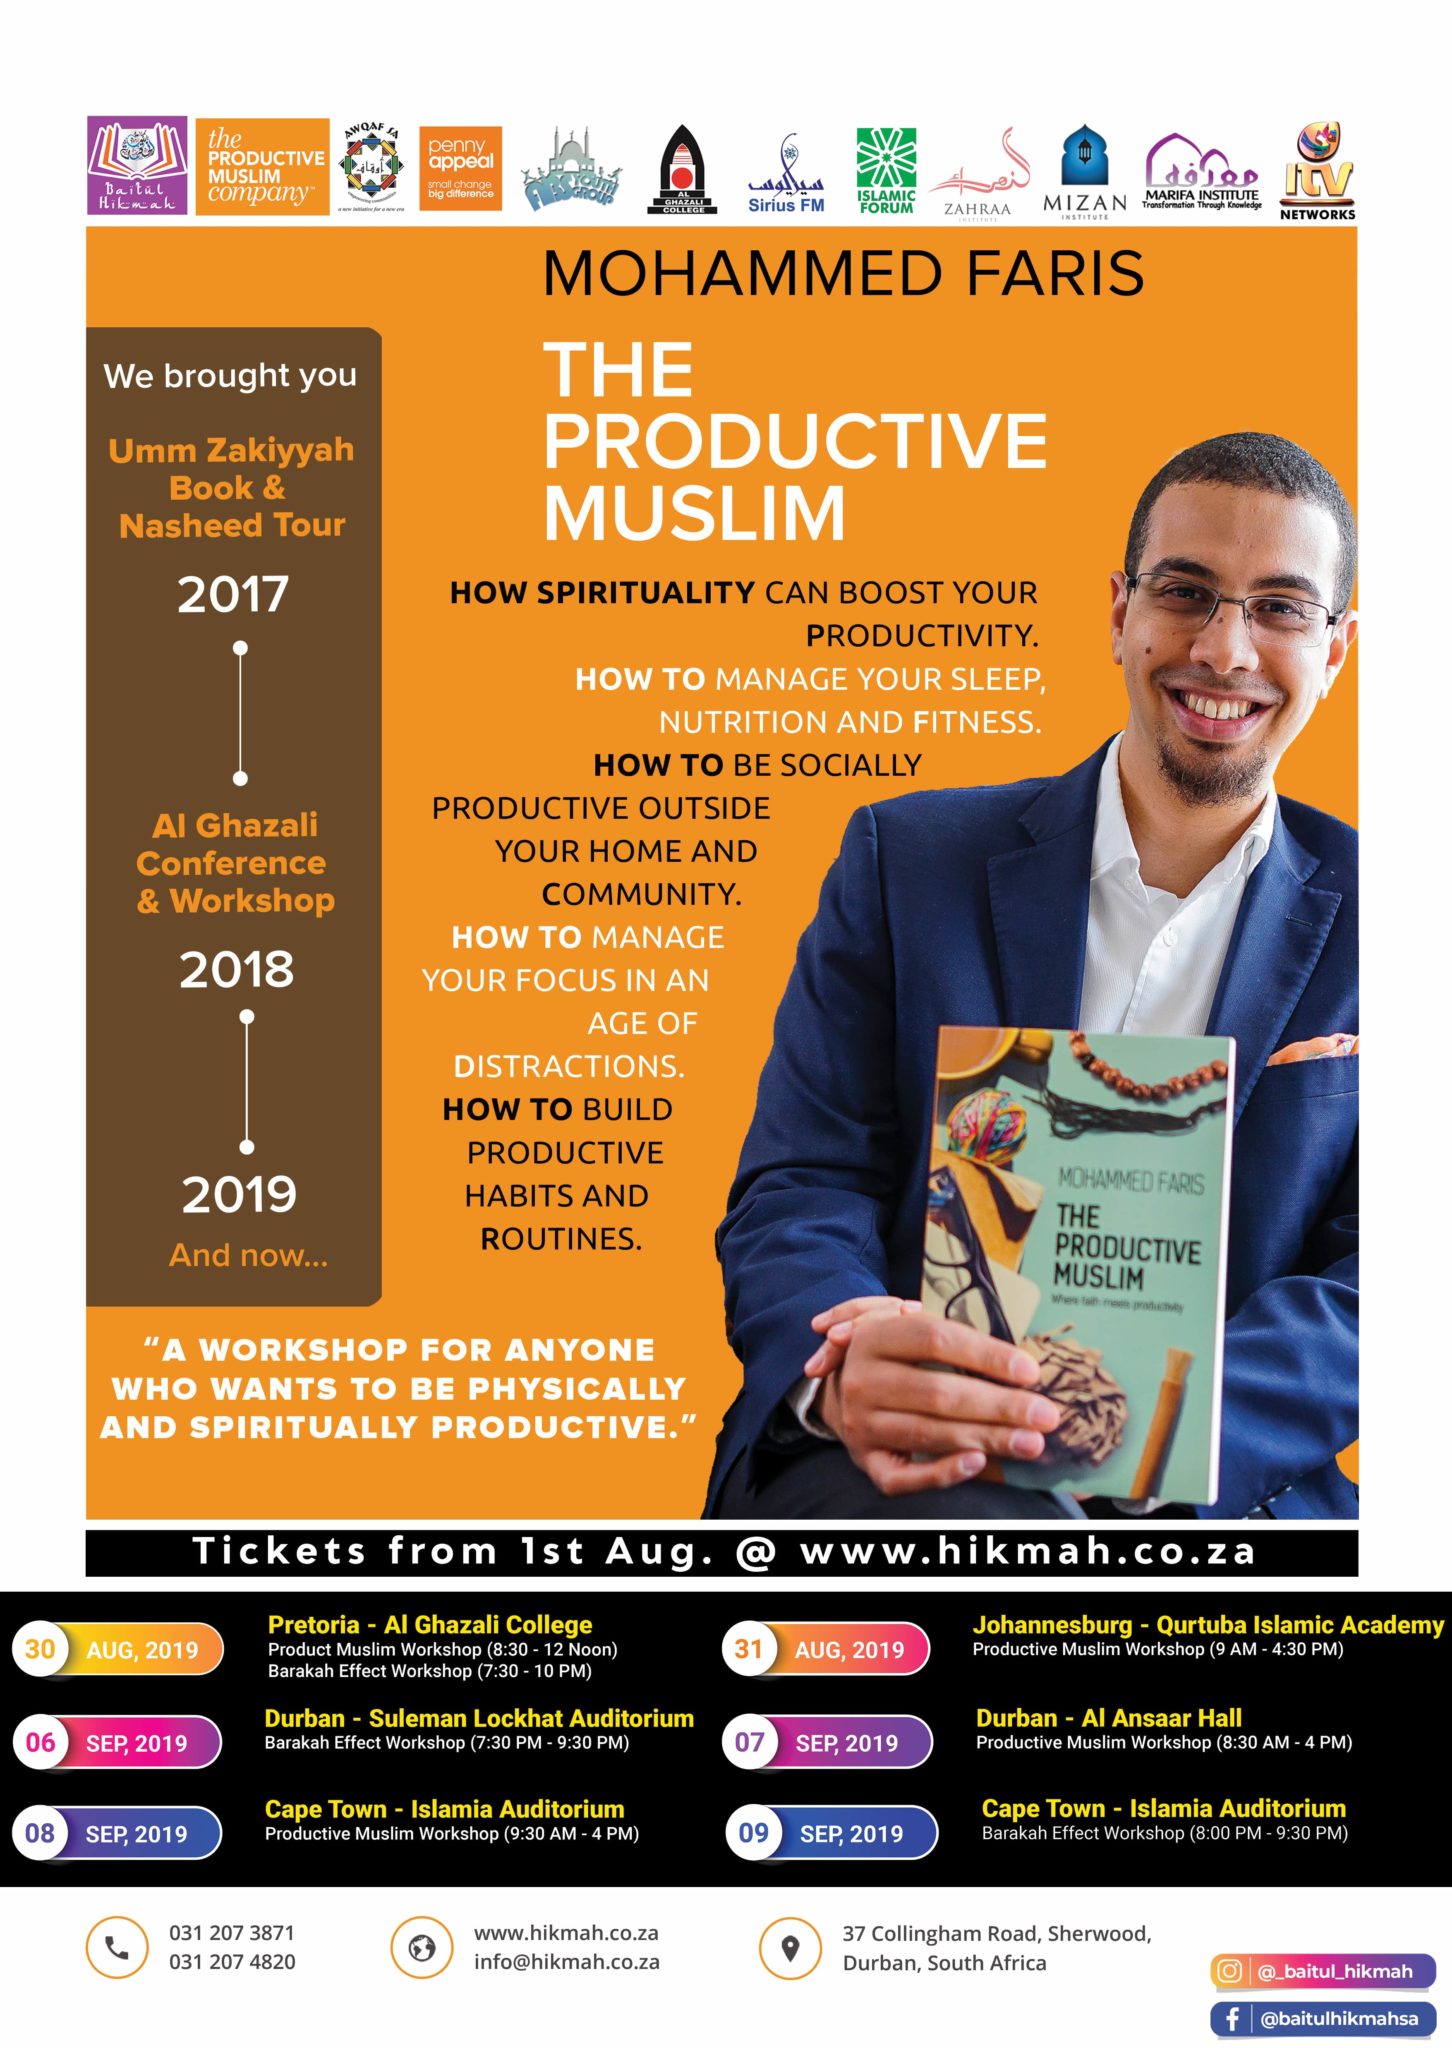 The Productive Muslim South Africa Workshop & Book Tour (September 2019)